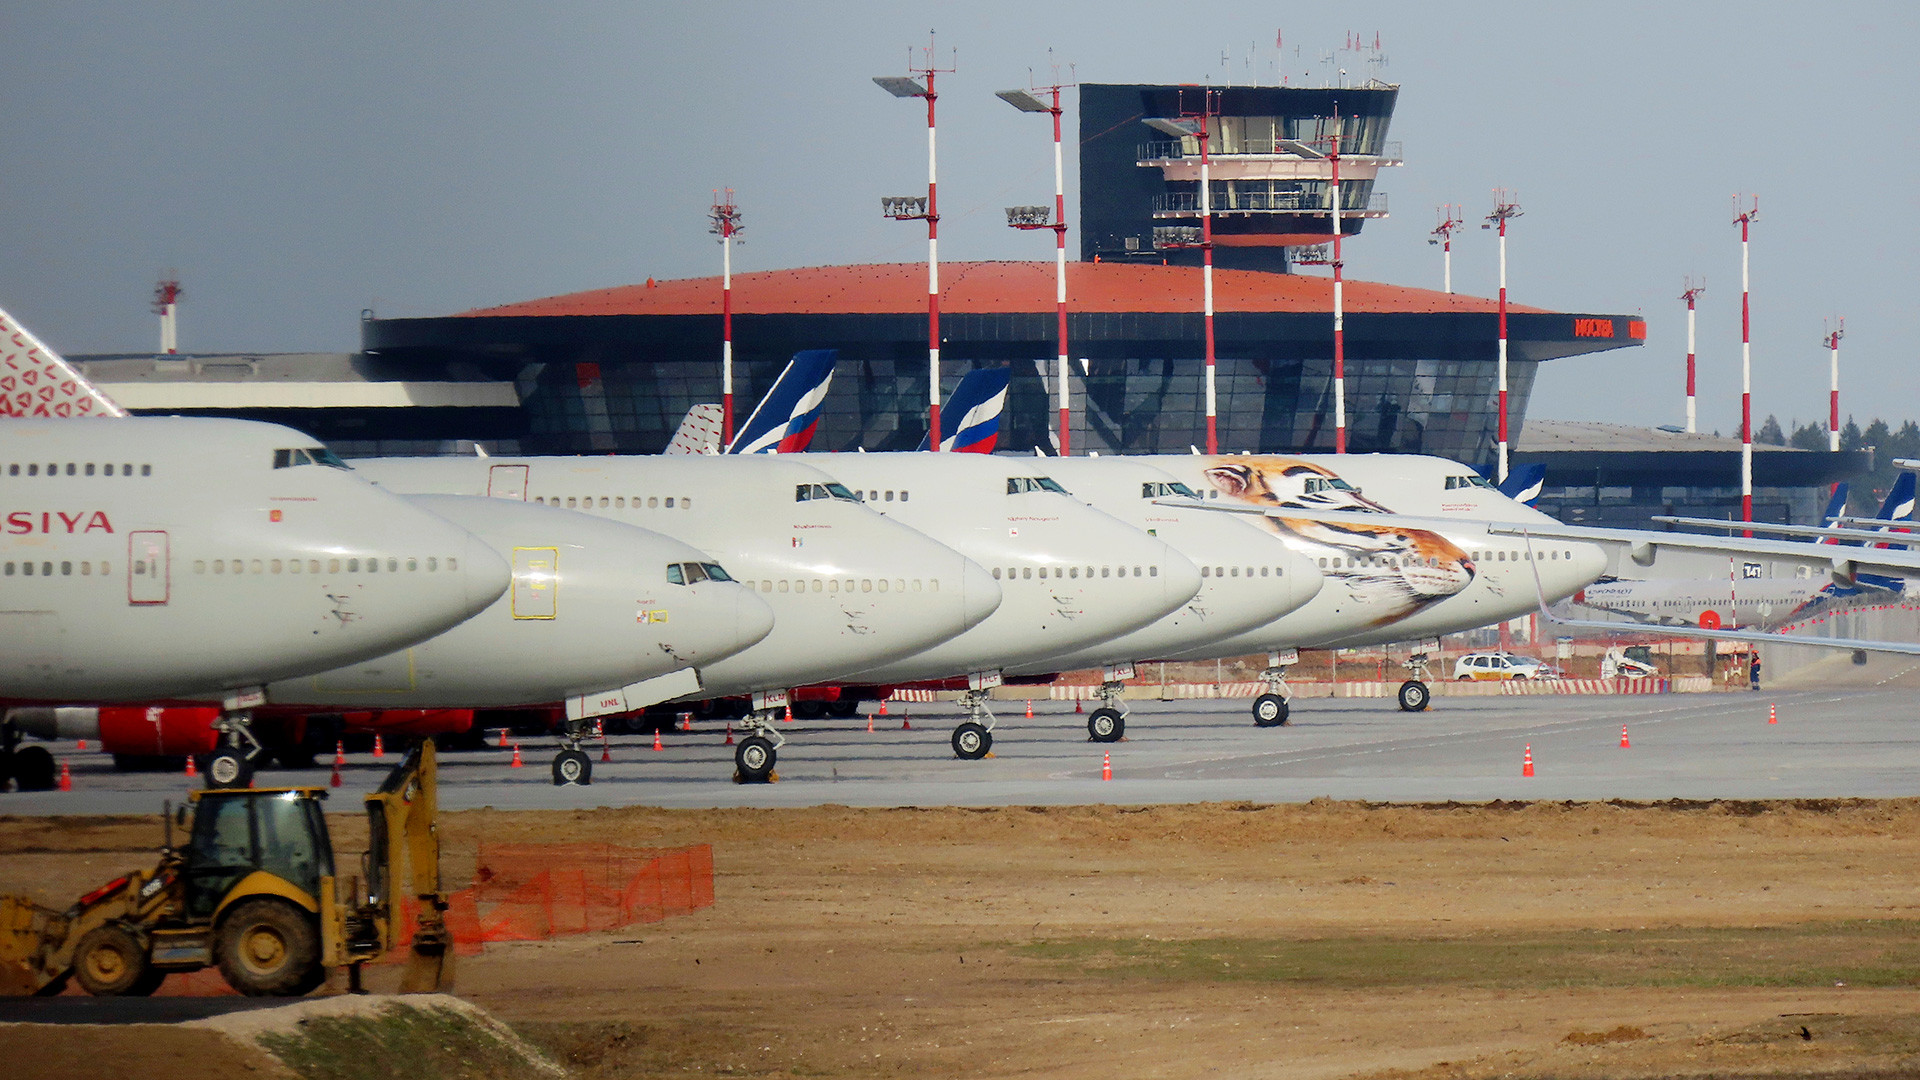 Planes are seen parked at Sheremetyevo International Airport, as the spread of the coronavirus disease (COVID-19) continues.